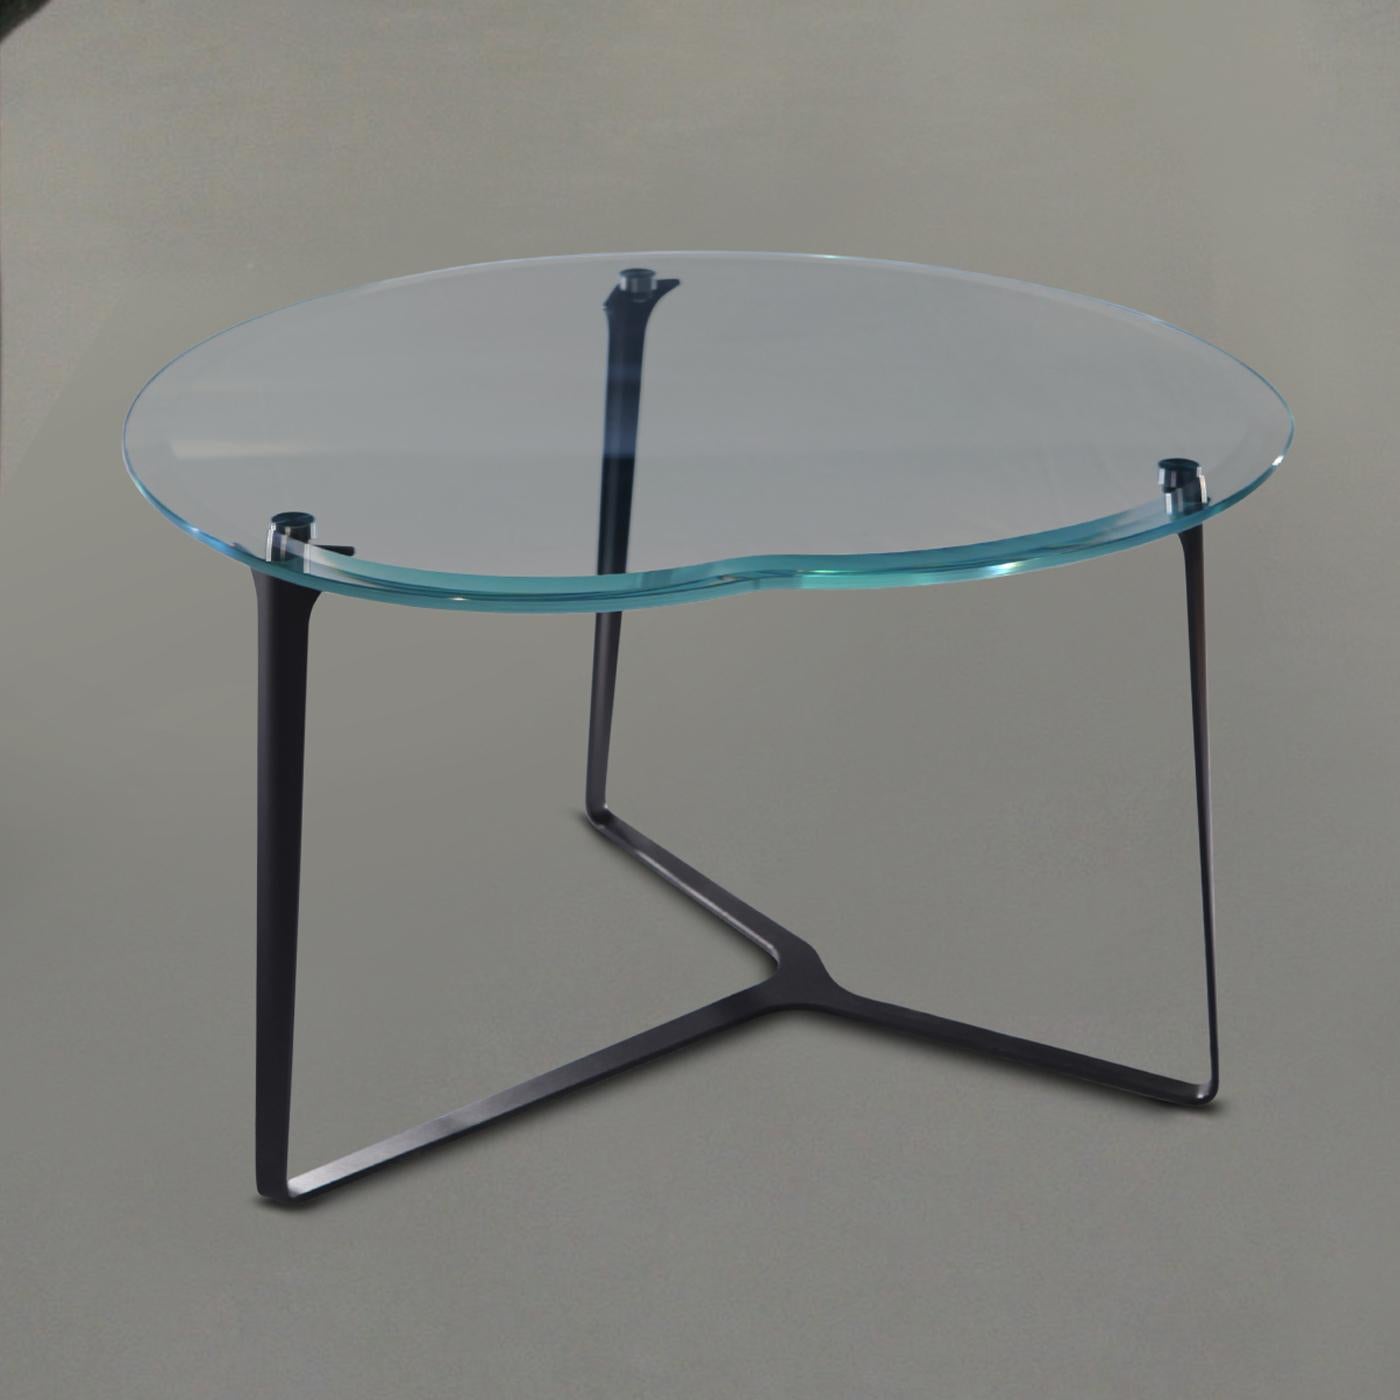 This exquisite coffee table will add an uplifting accent to any living space with its ultra-clear crystal top with cut edges whose profile is playfully shaped like an apple. The thin and elegant steel base branches out in three slender legs raising